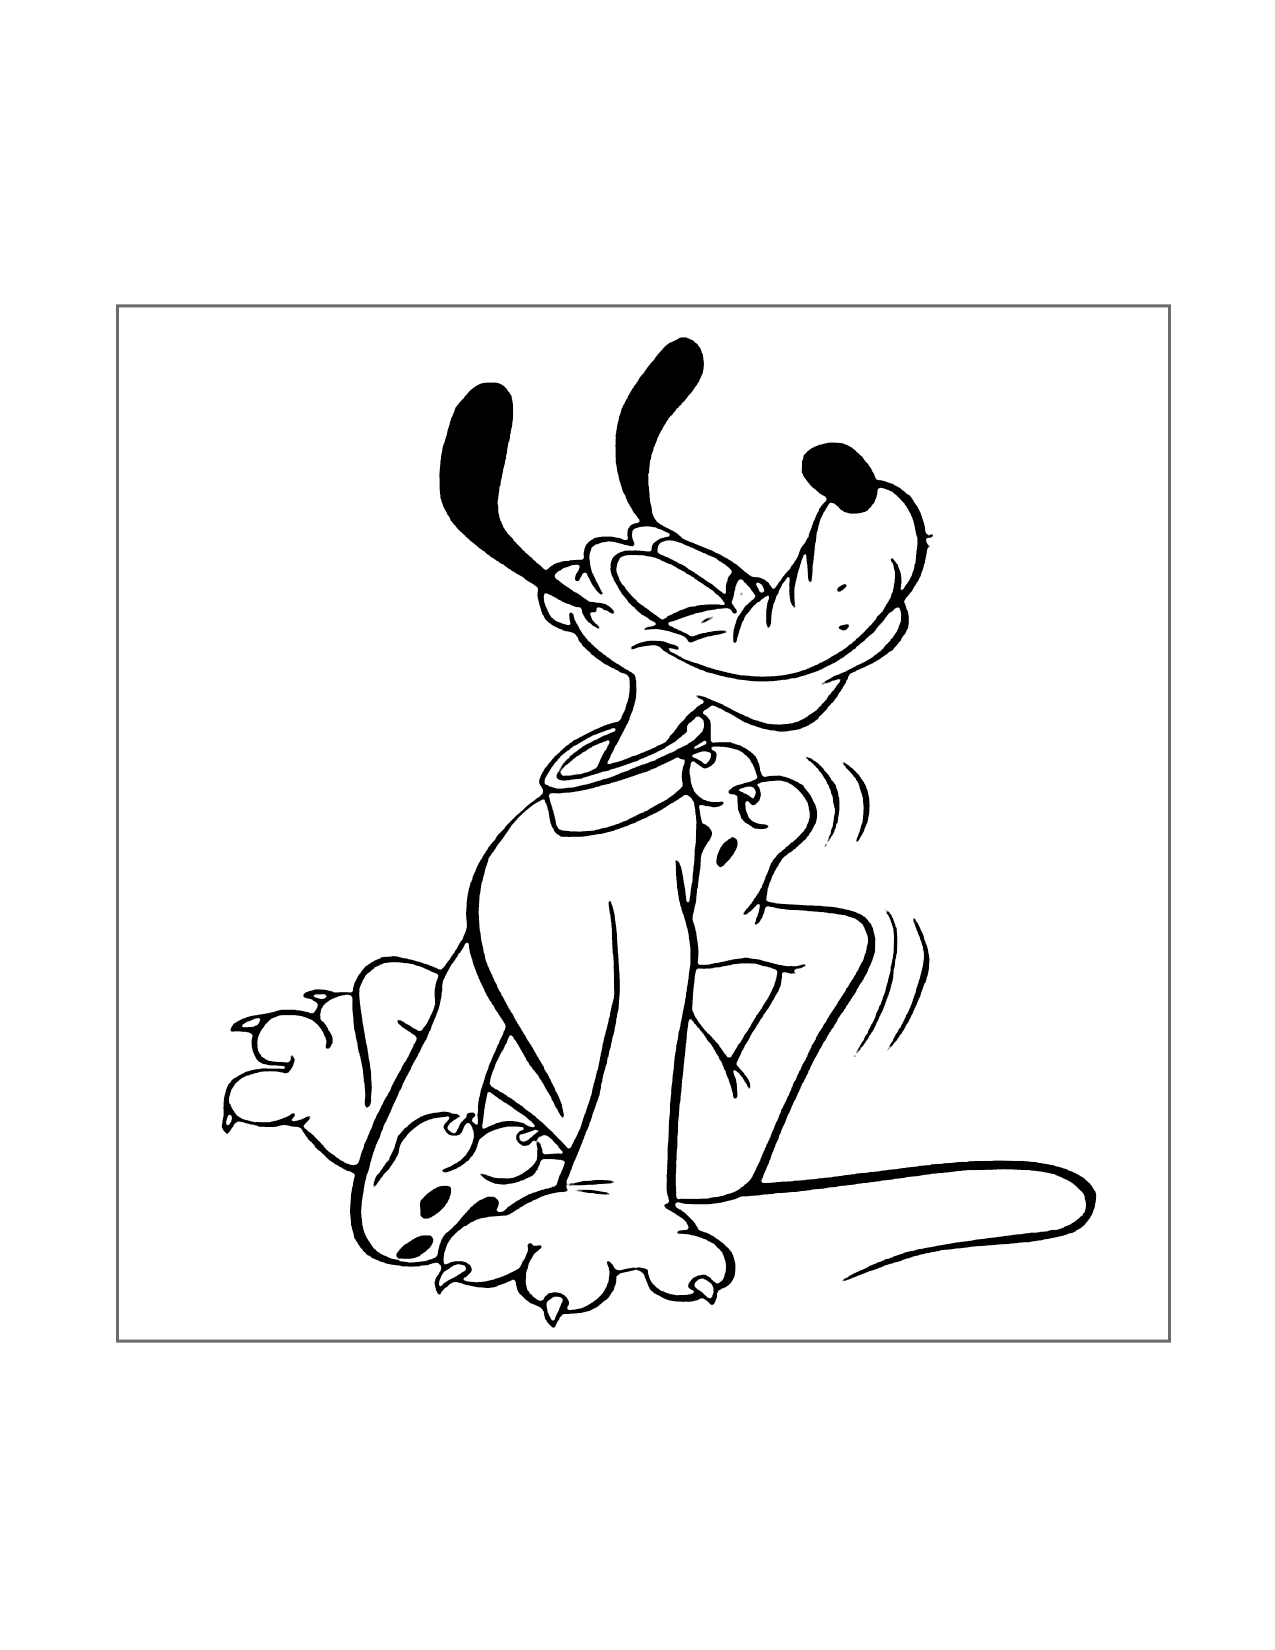 Pluto Scratches An Itch Coloring Page